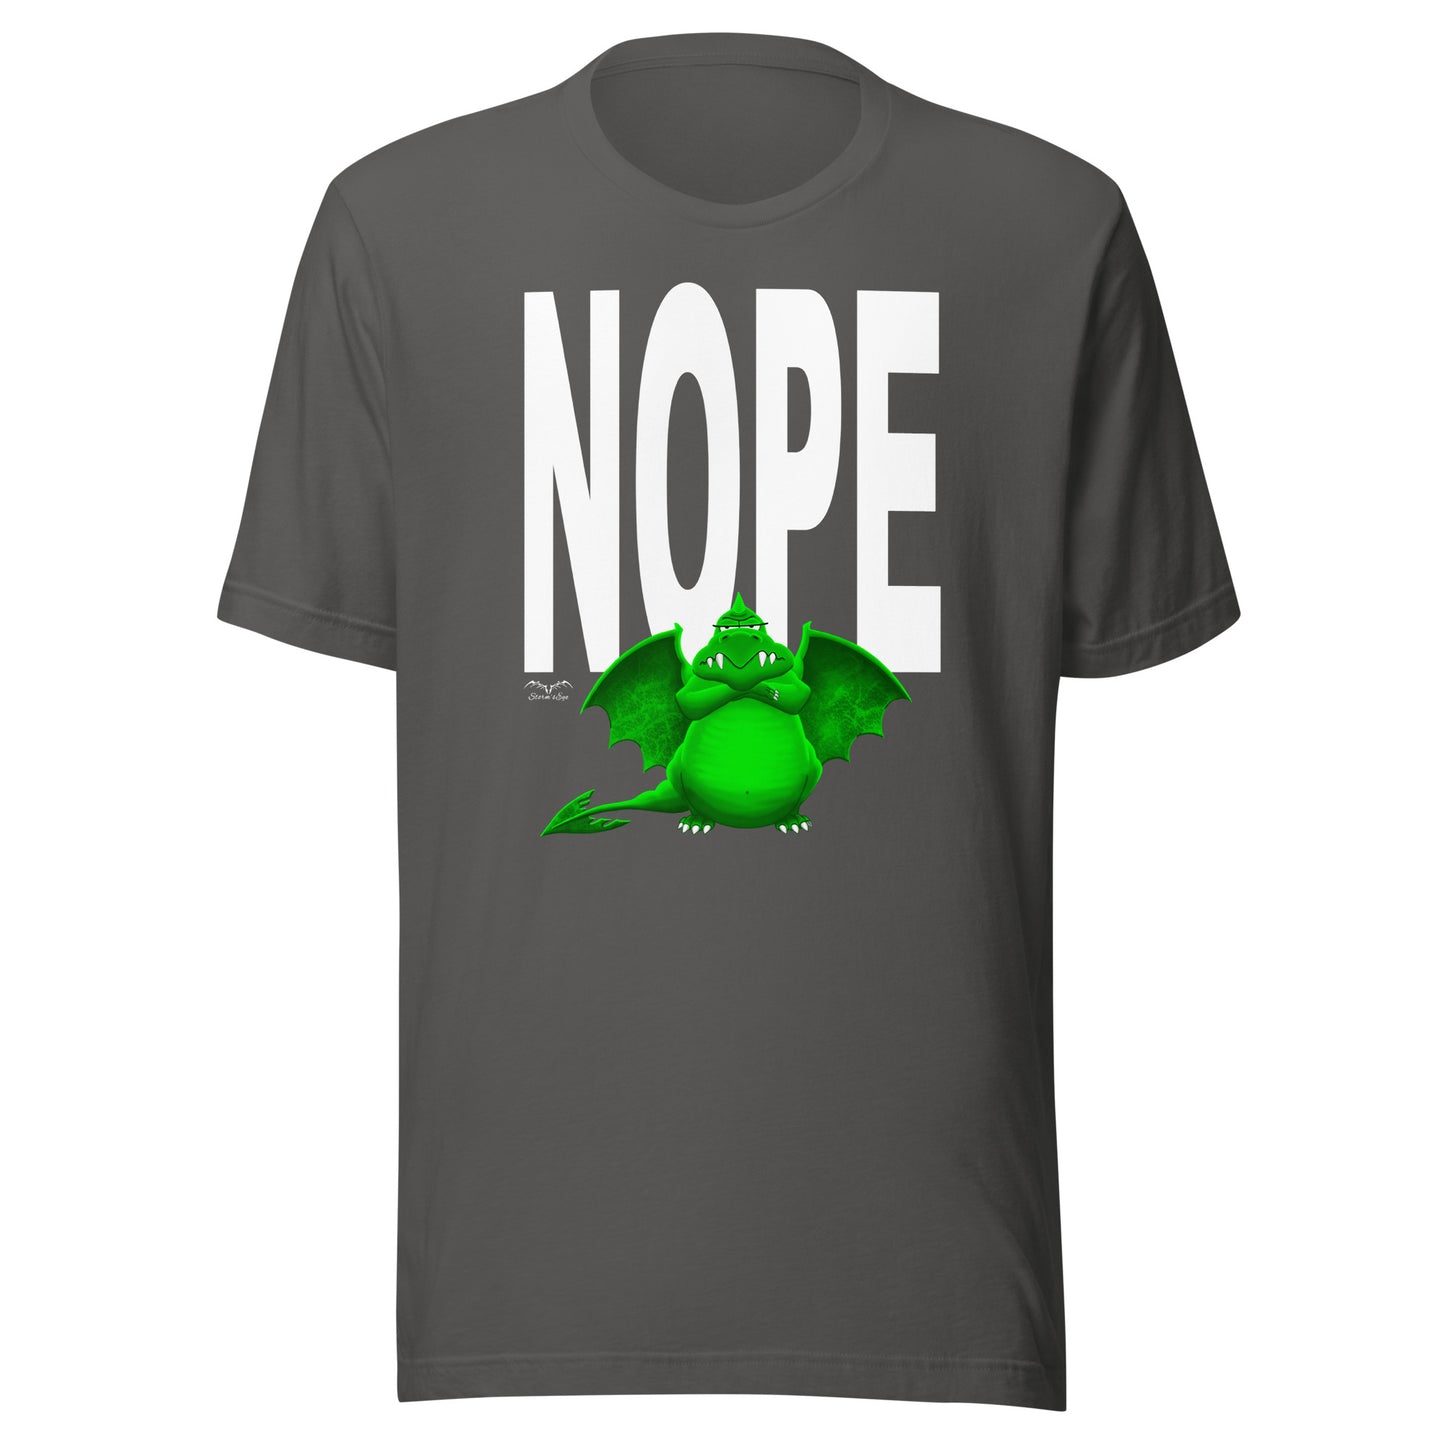 nope dragon bouncer t-shirt, grey, by Stormseye Design